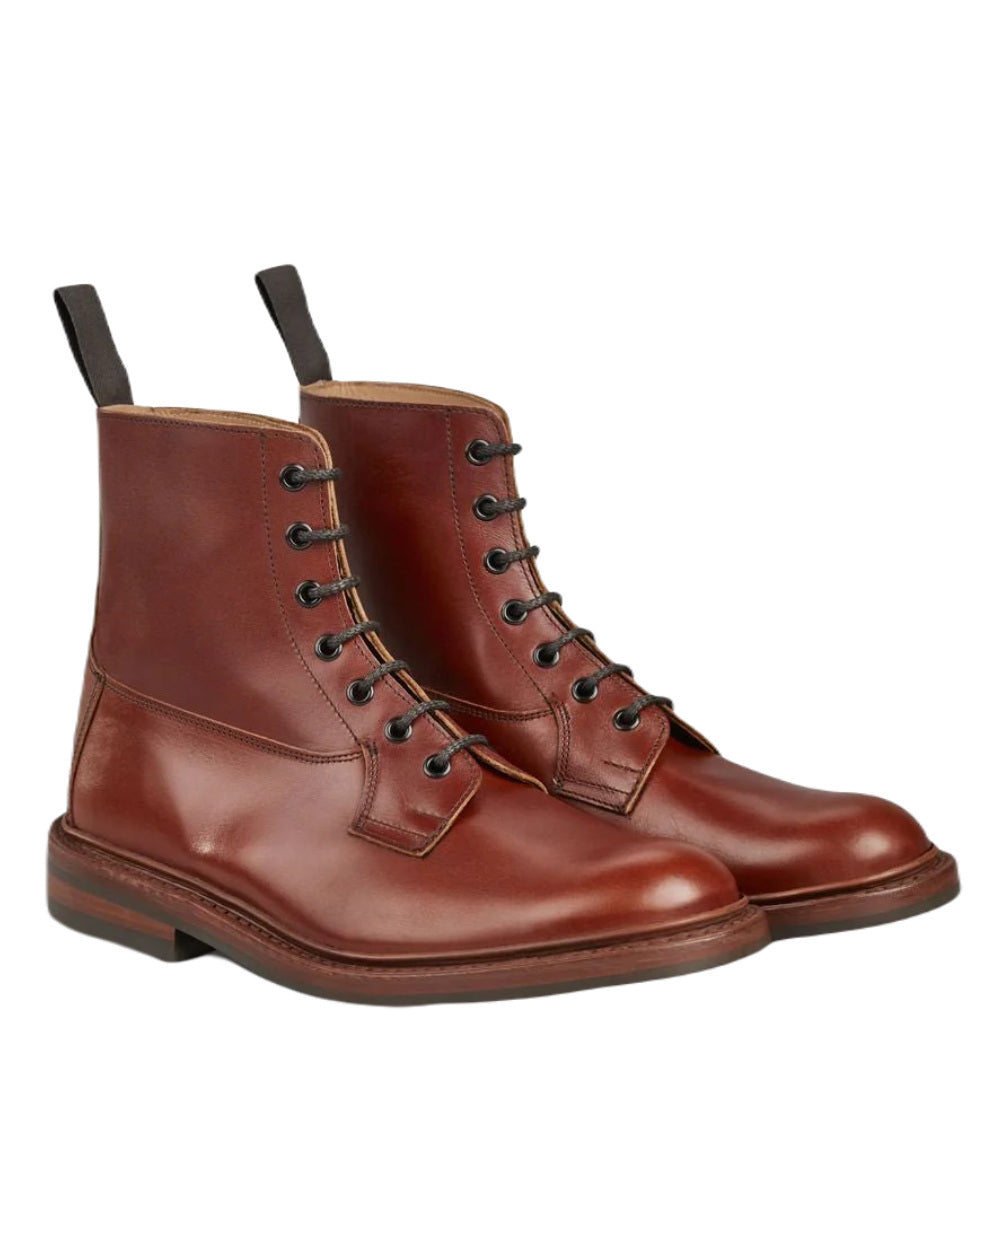 Marron Antique Coloured Trickers Burford Leather Sole Country Boot On A White Background 